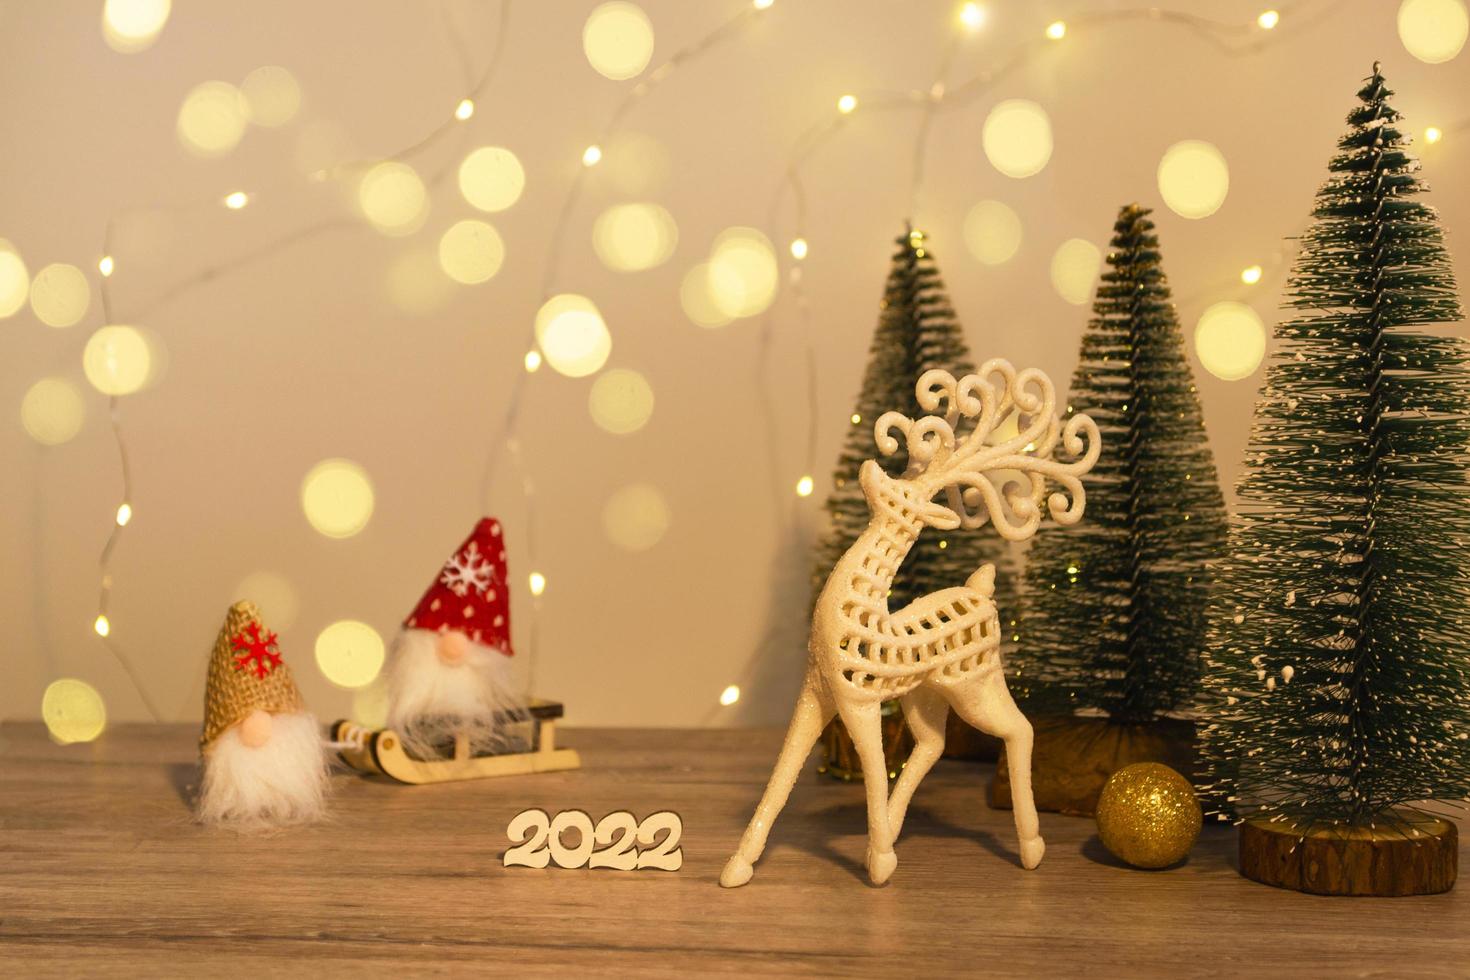 Christmas and New Year's decor. Christmas deer, numbers 2022, gnome on a sled and Christmas trees on a wooden background with Christmas lights. Christmas card photo